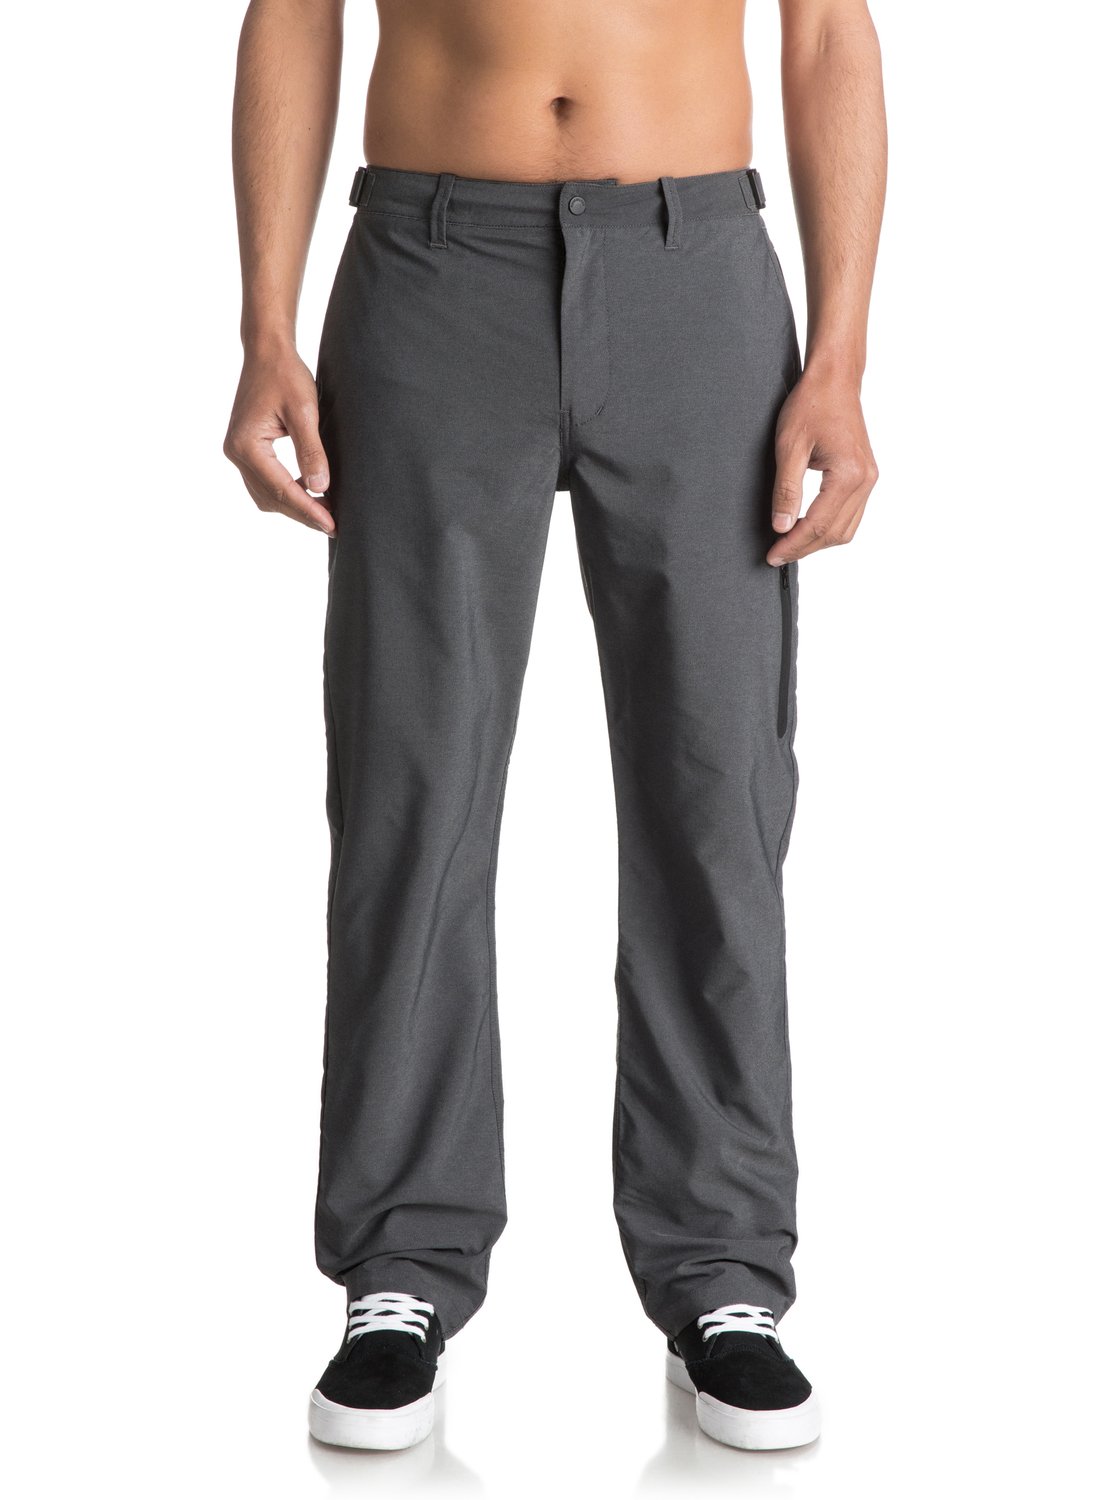 Waterman Stand Up - Pantalon chino deperlant pour Homme - Quiksilver